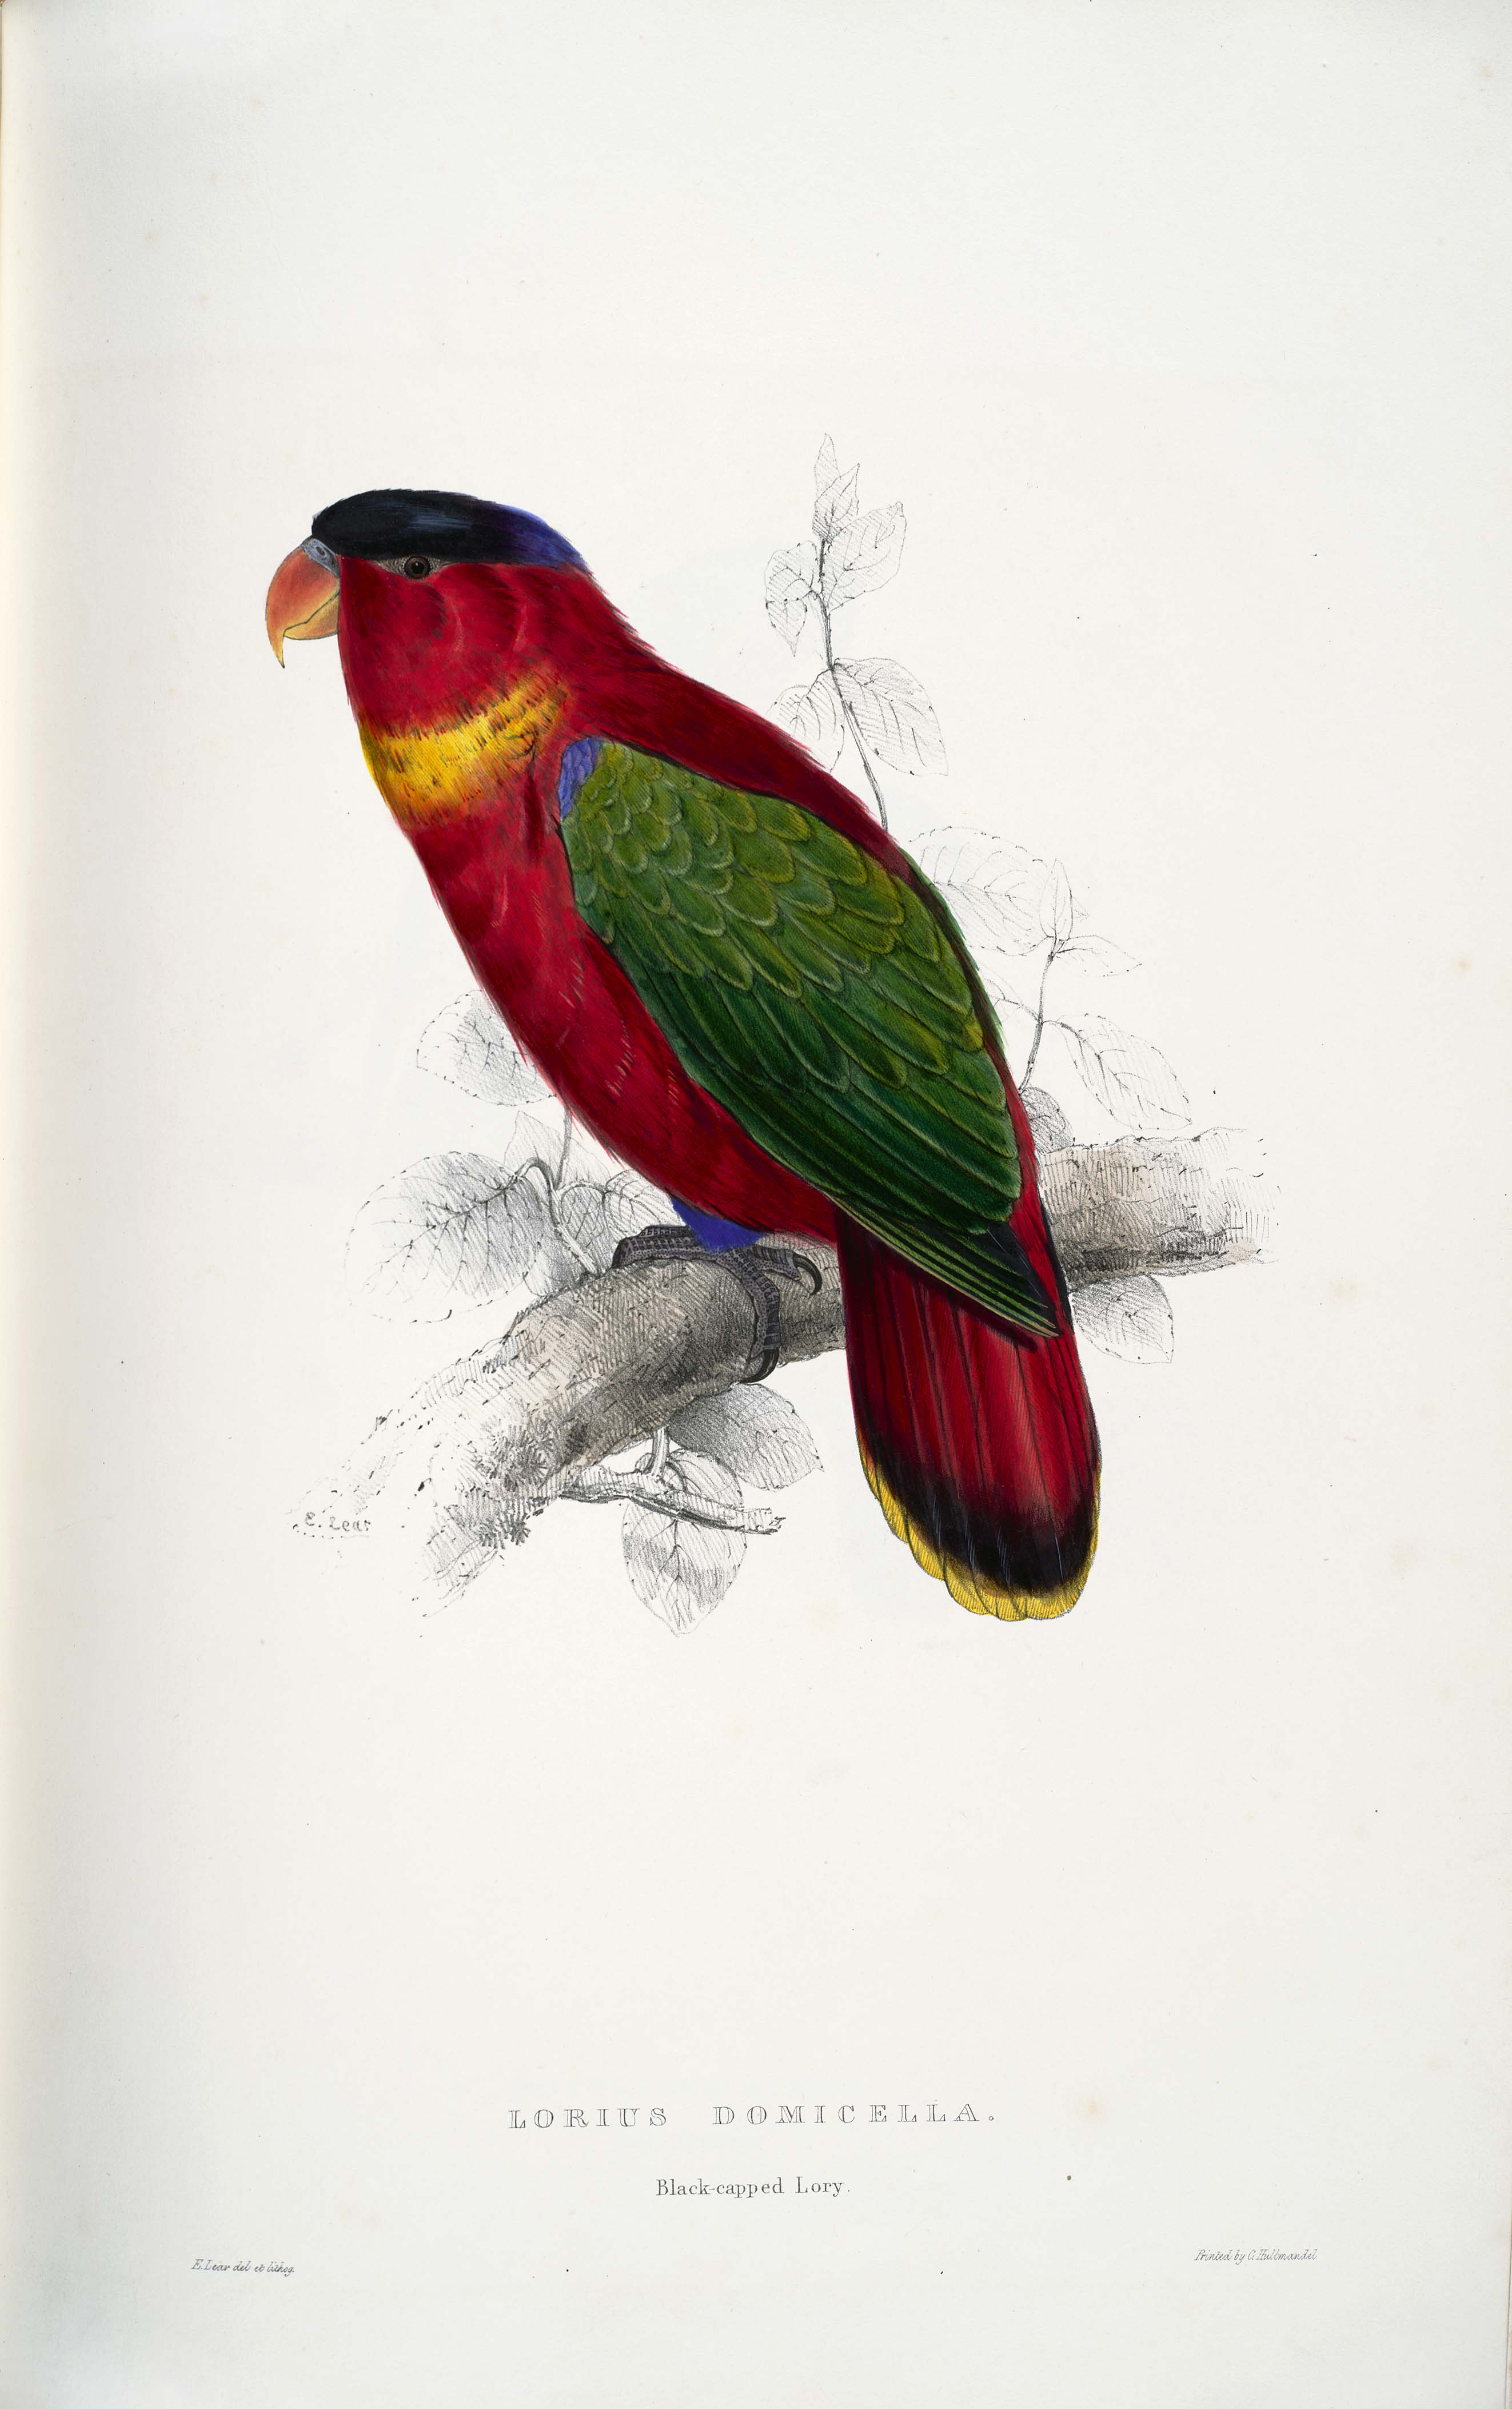 Lorius domicella -painting by Edward Lear (approx 1832)